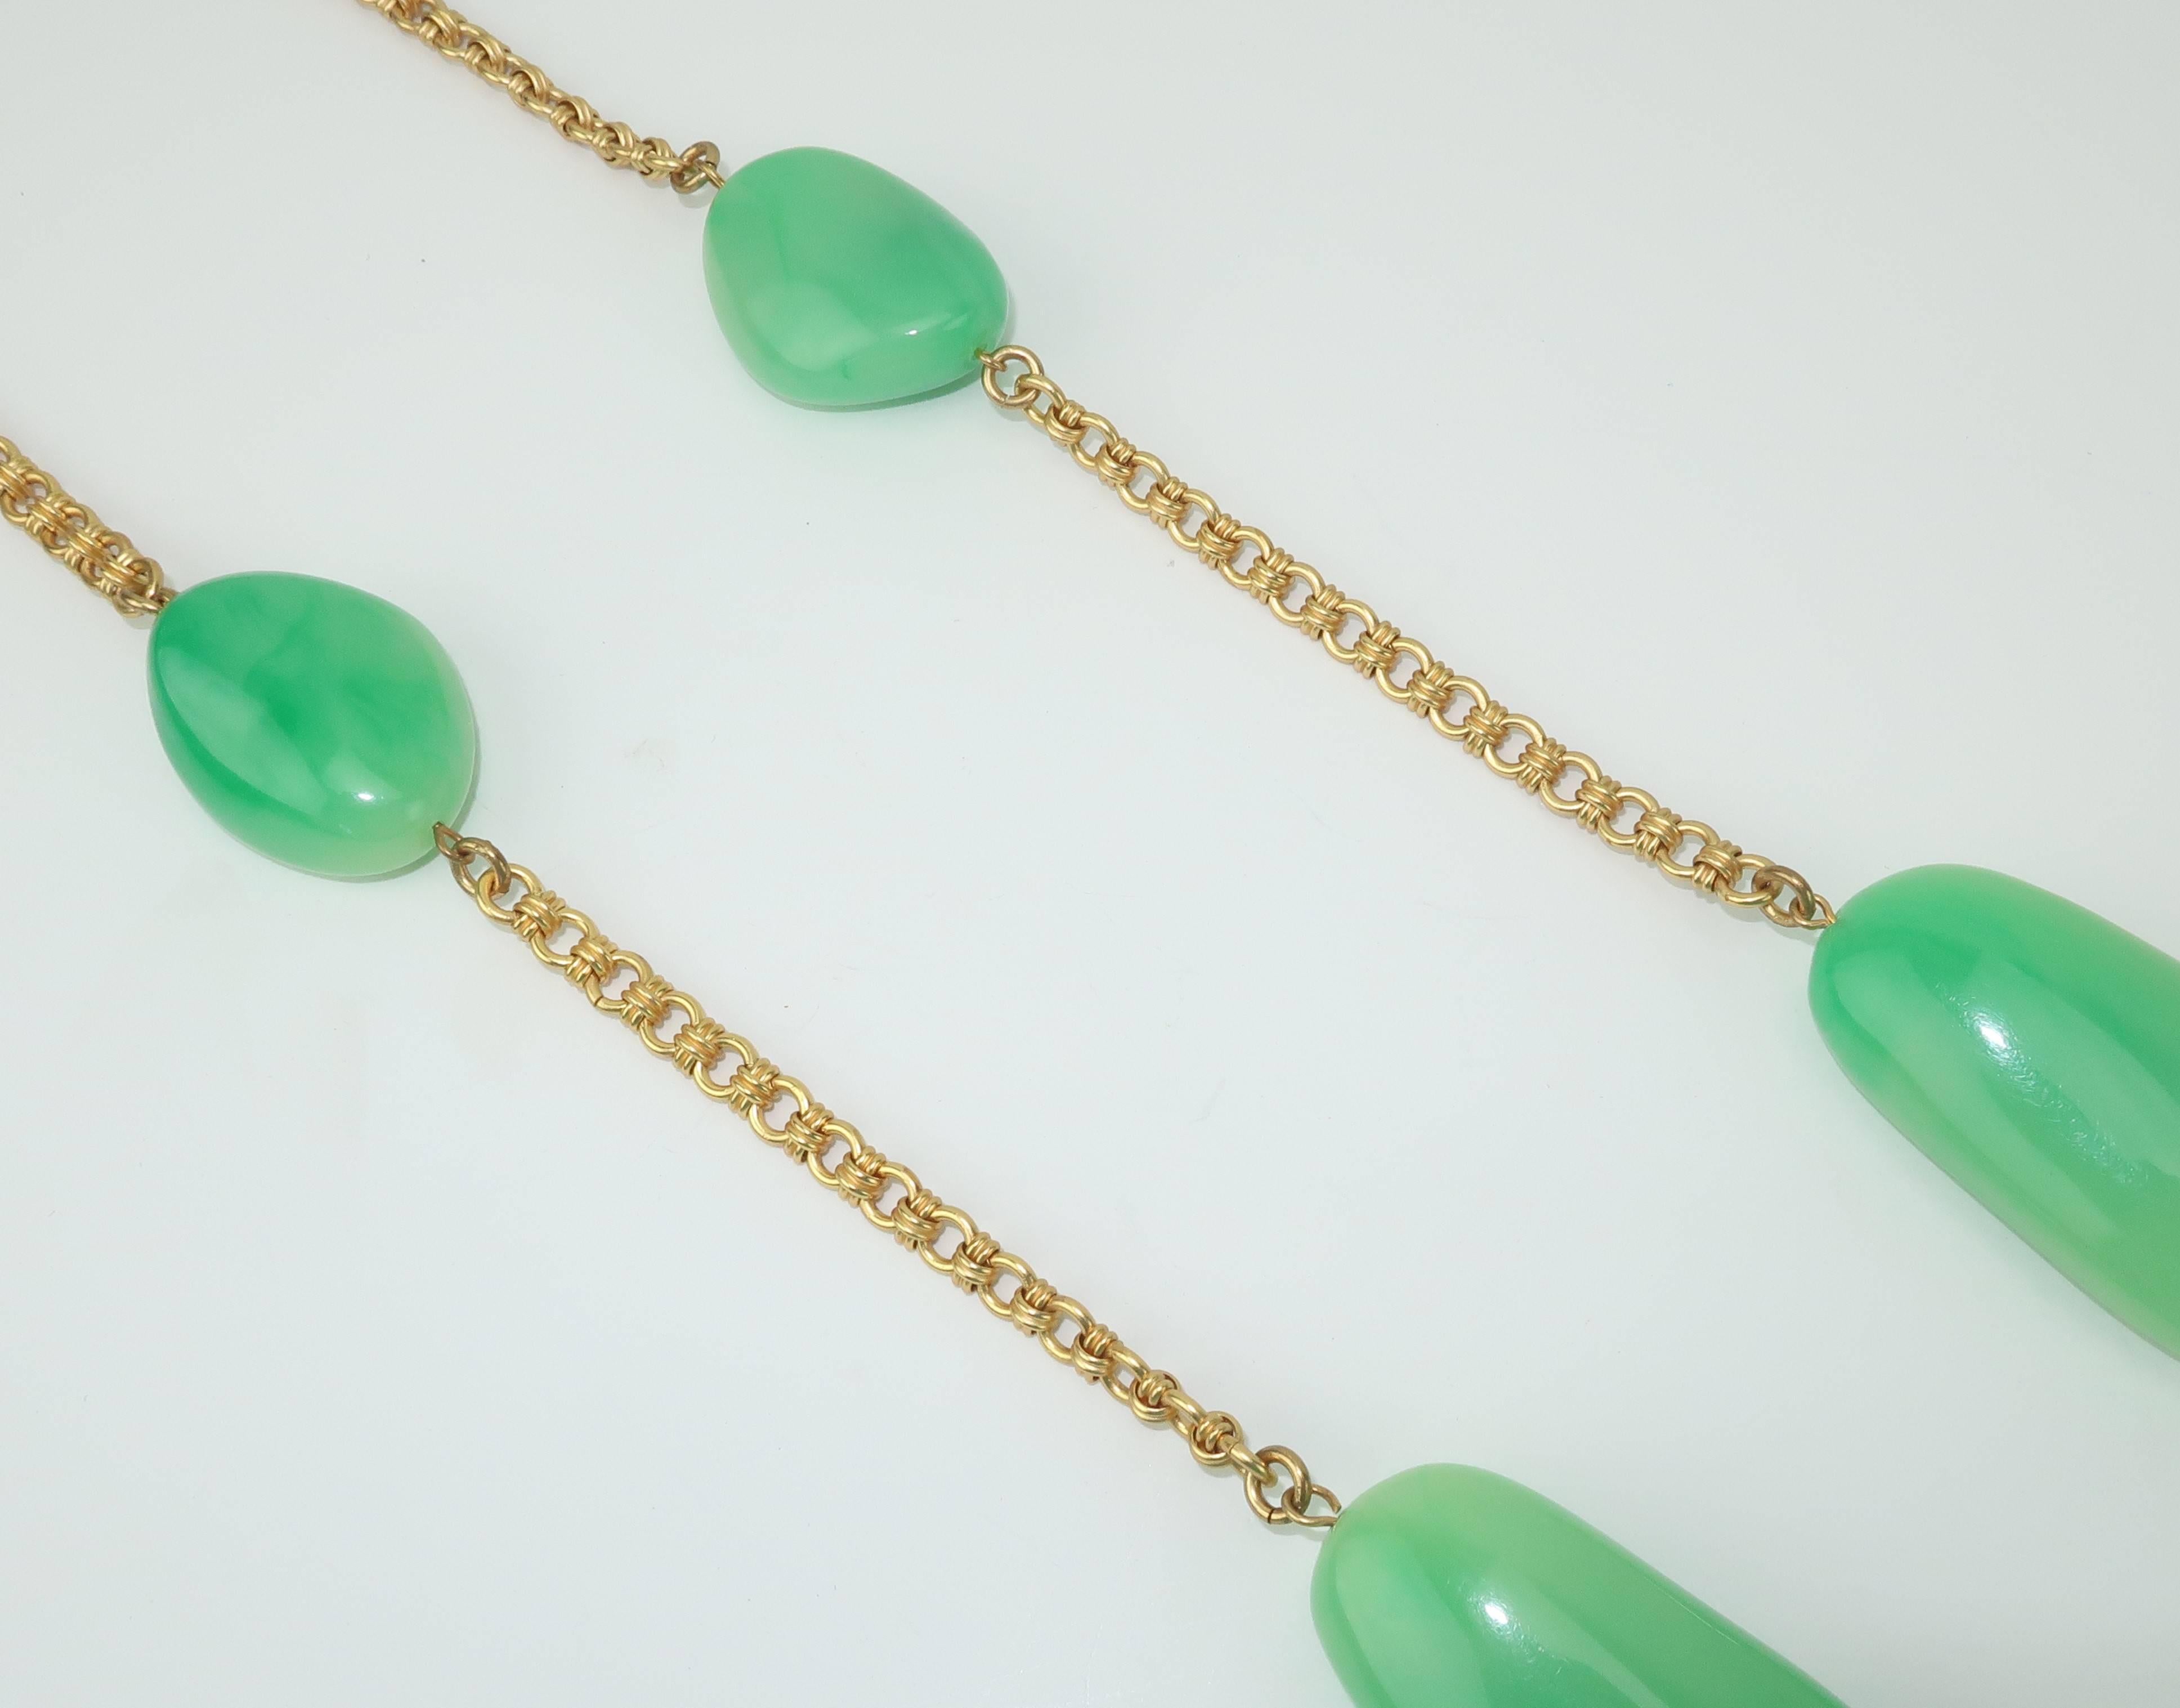 Women's Vintage Kenneth Jay Lane Faux Jade Opera Length Gold Chain Necklace